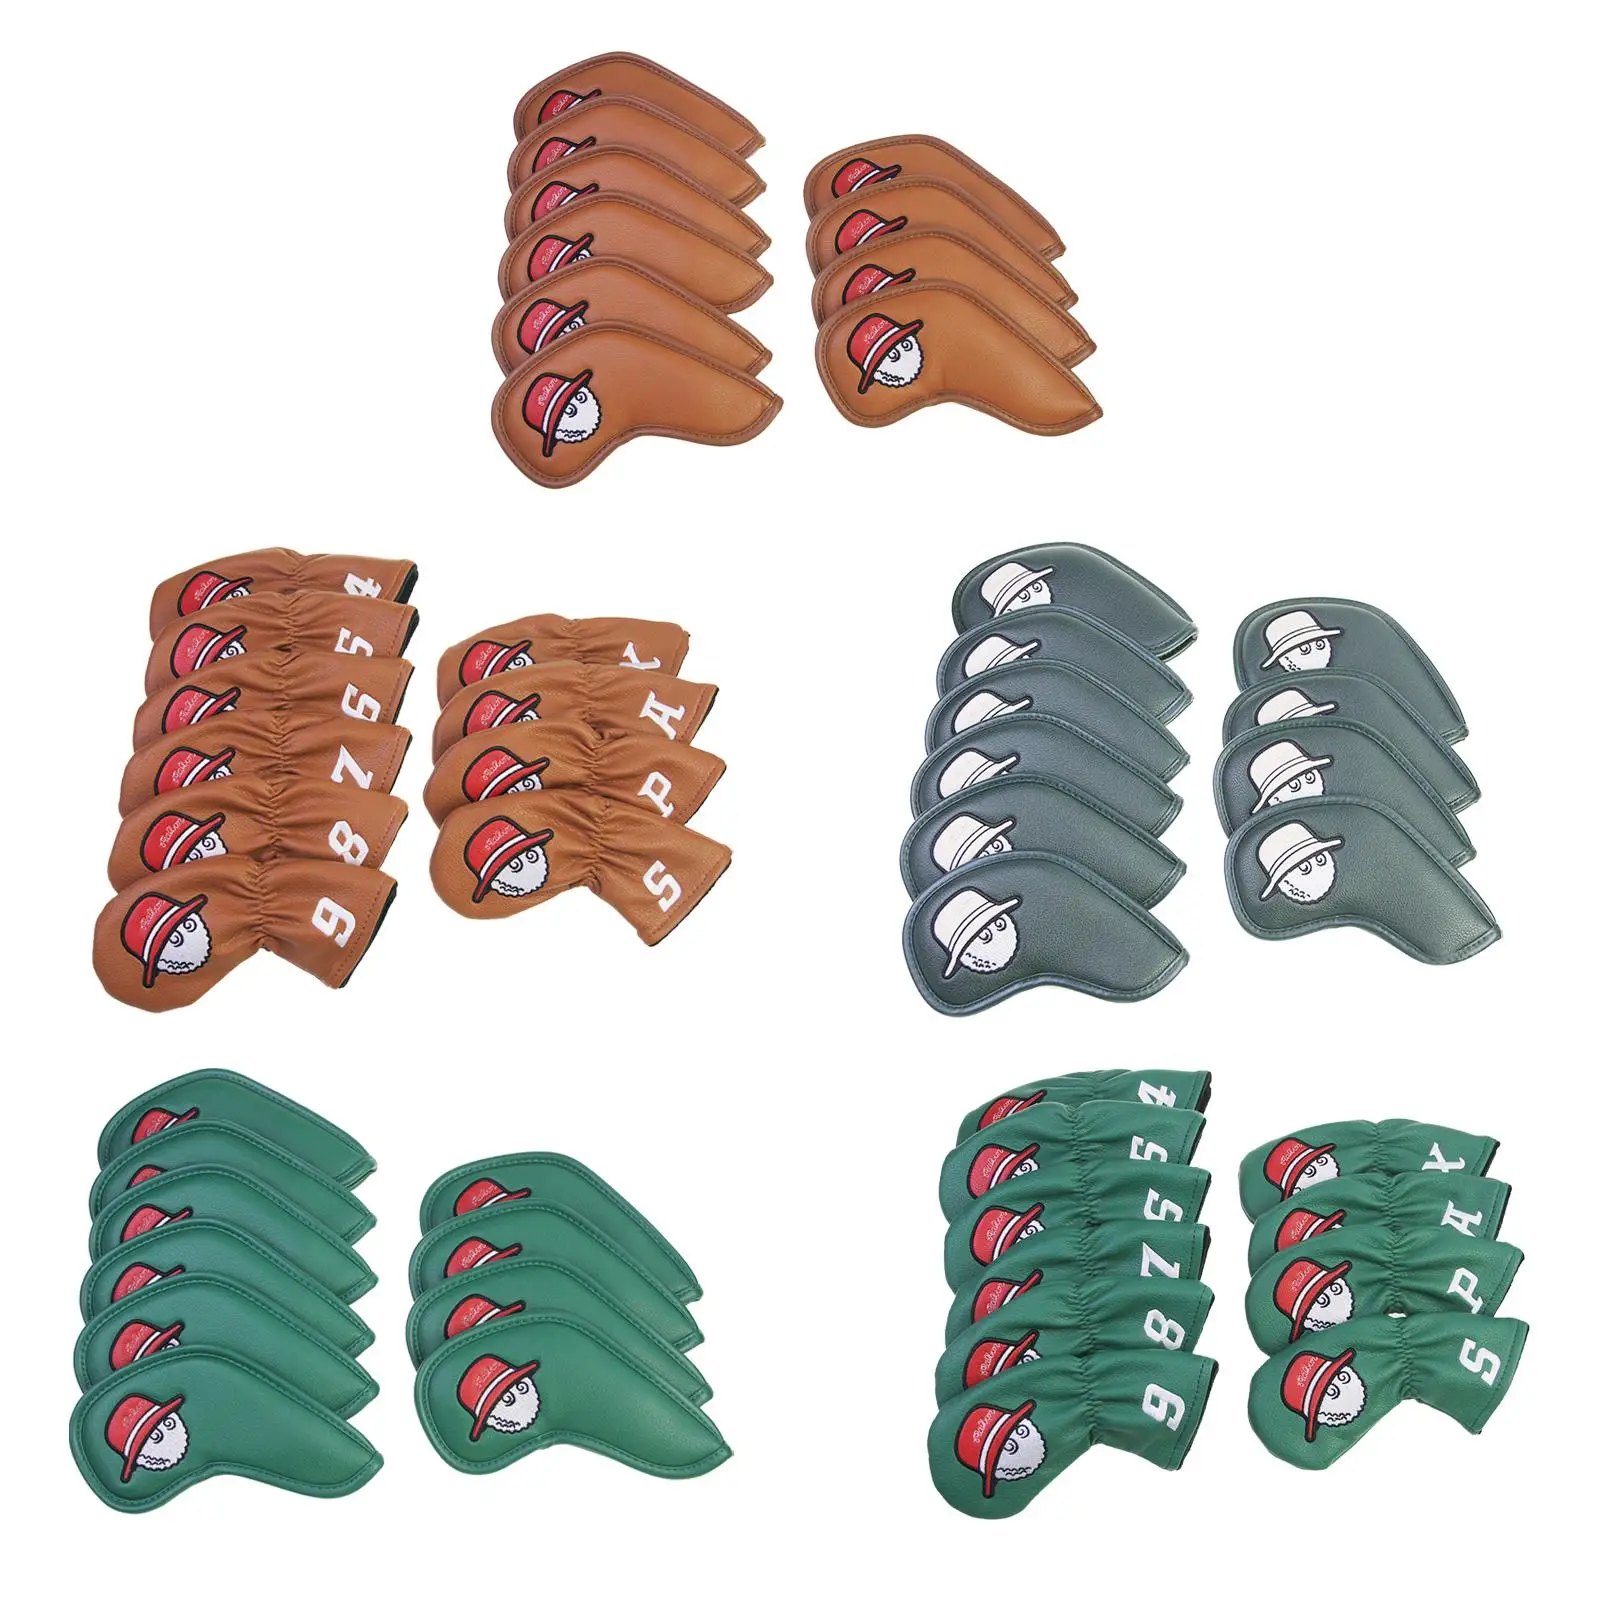 

10 Pieces Golf Iron Covers Set Golf Club Head Cover Golf Wedges Headcovers for Club Shaft